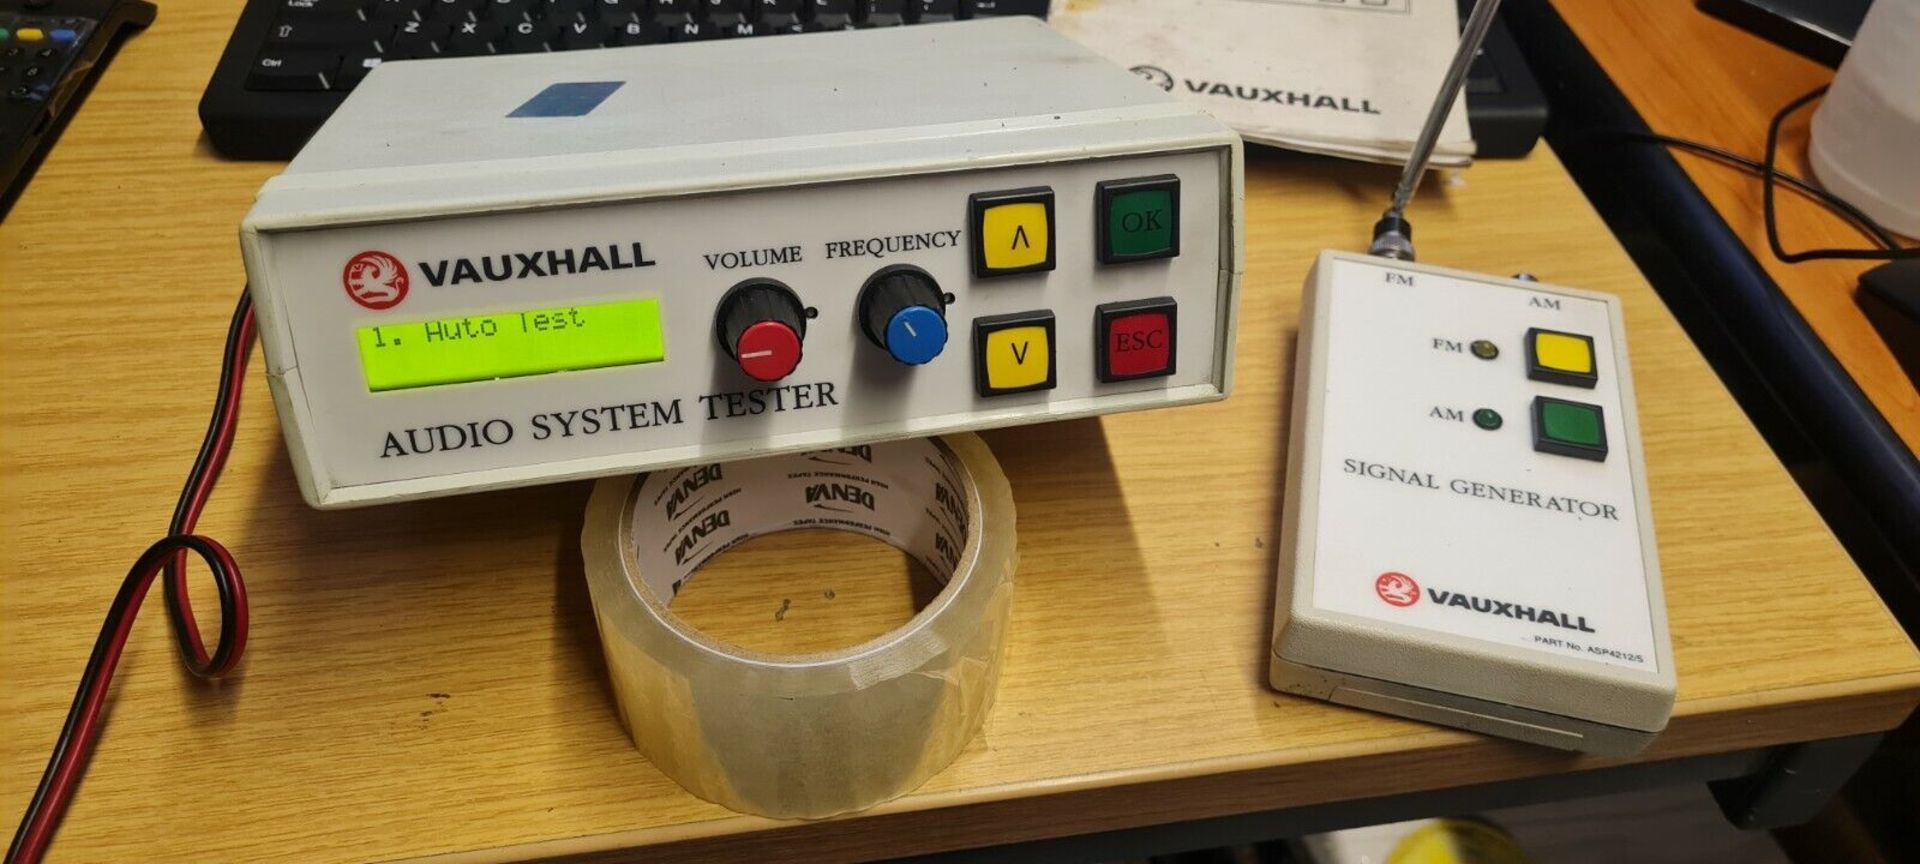 AUTOMOTIVE LOT JL49 VAUXHALL AUDIO SYSTEM TESTER WORKSHOP TOOL IN CASE REF KM46 - Image 6 of 7